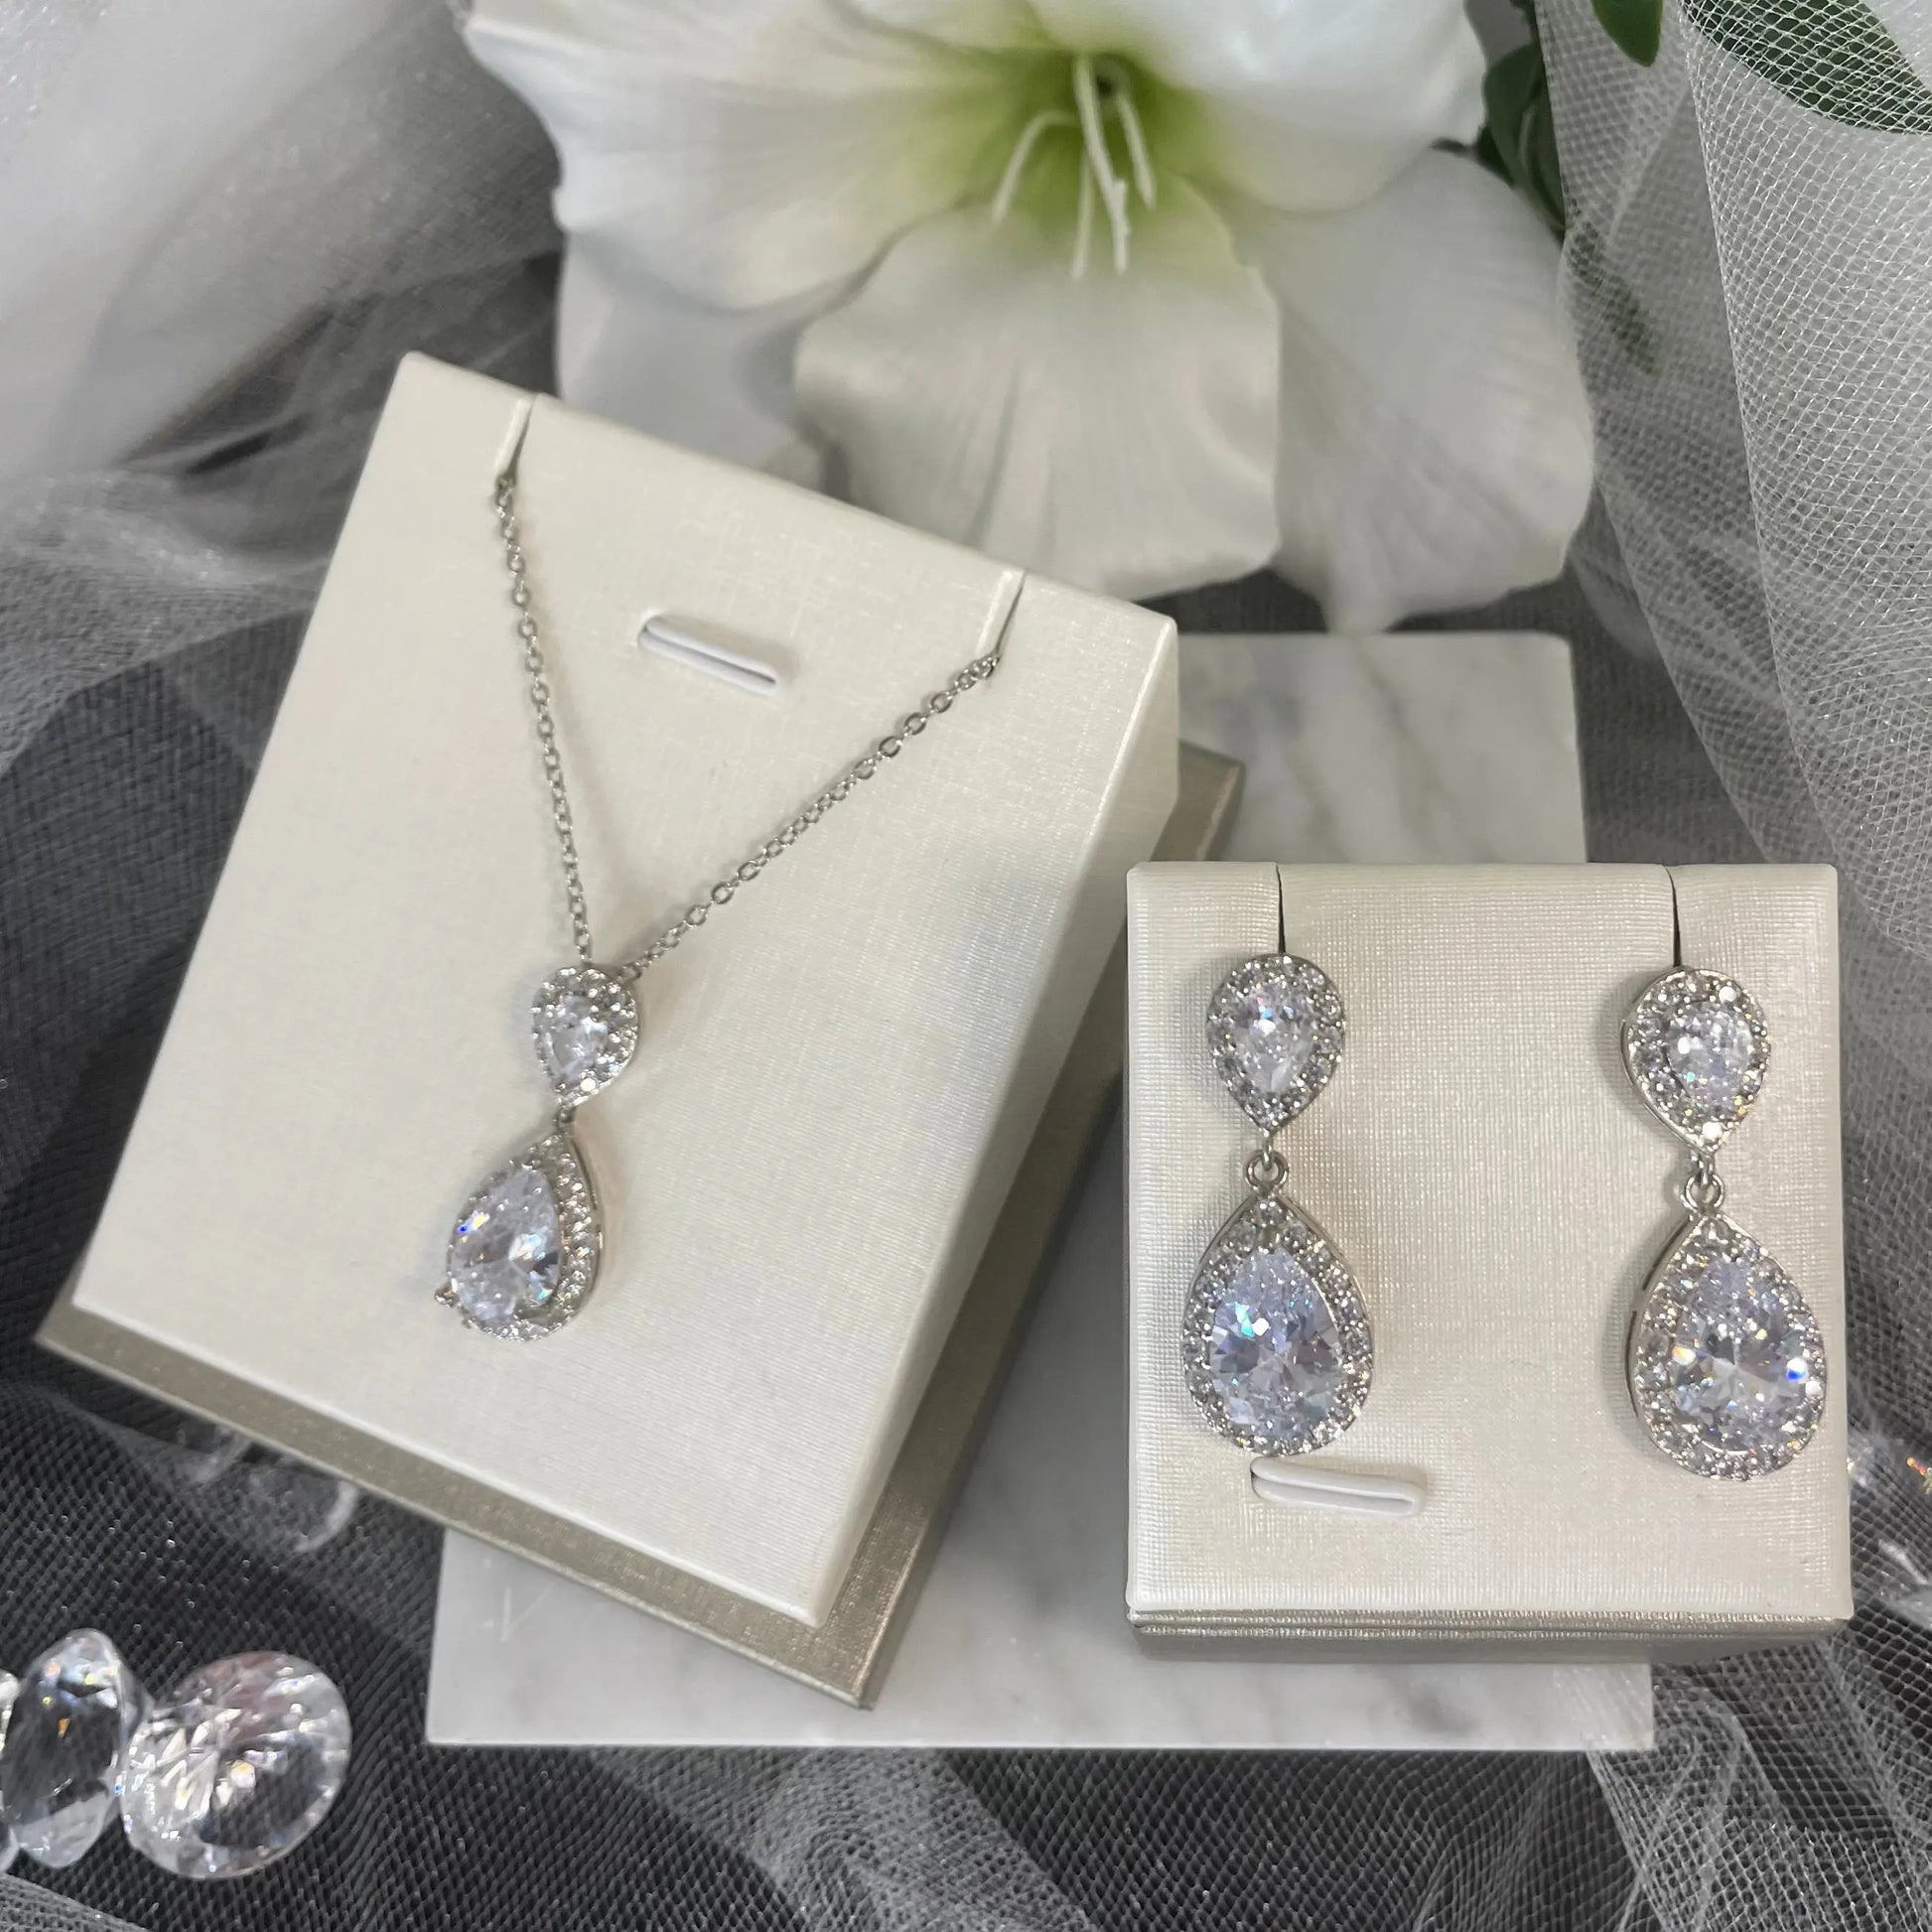 Leona Necklace & Earring Set (Silver): A stunning silver necklace and earring set featuring large CZ stones surrounded by smaller CZs, perfect for special occasions.